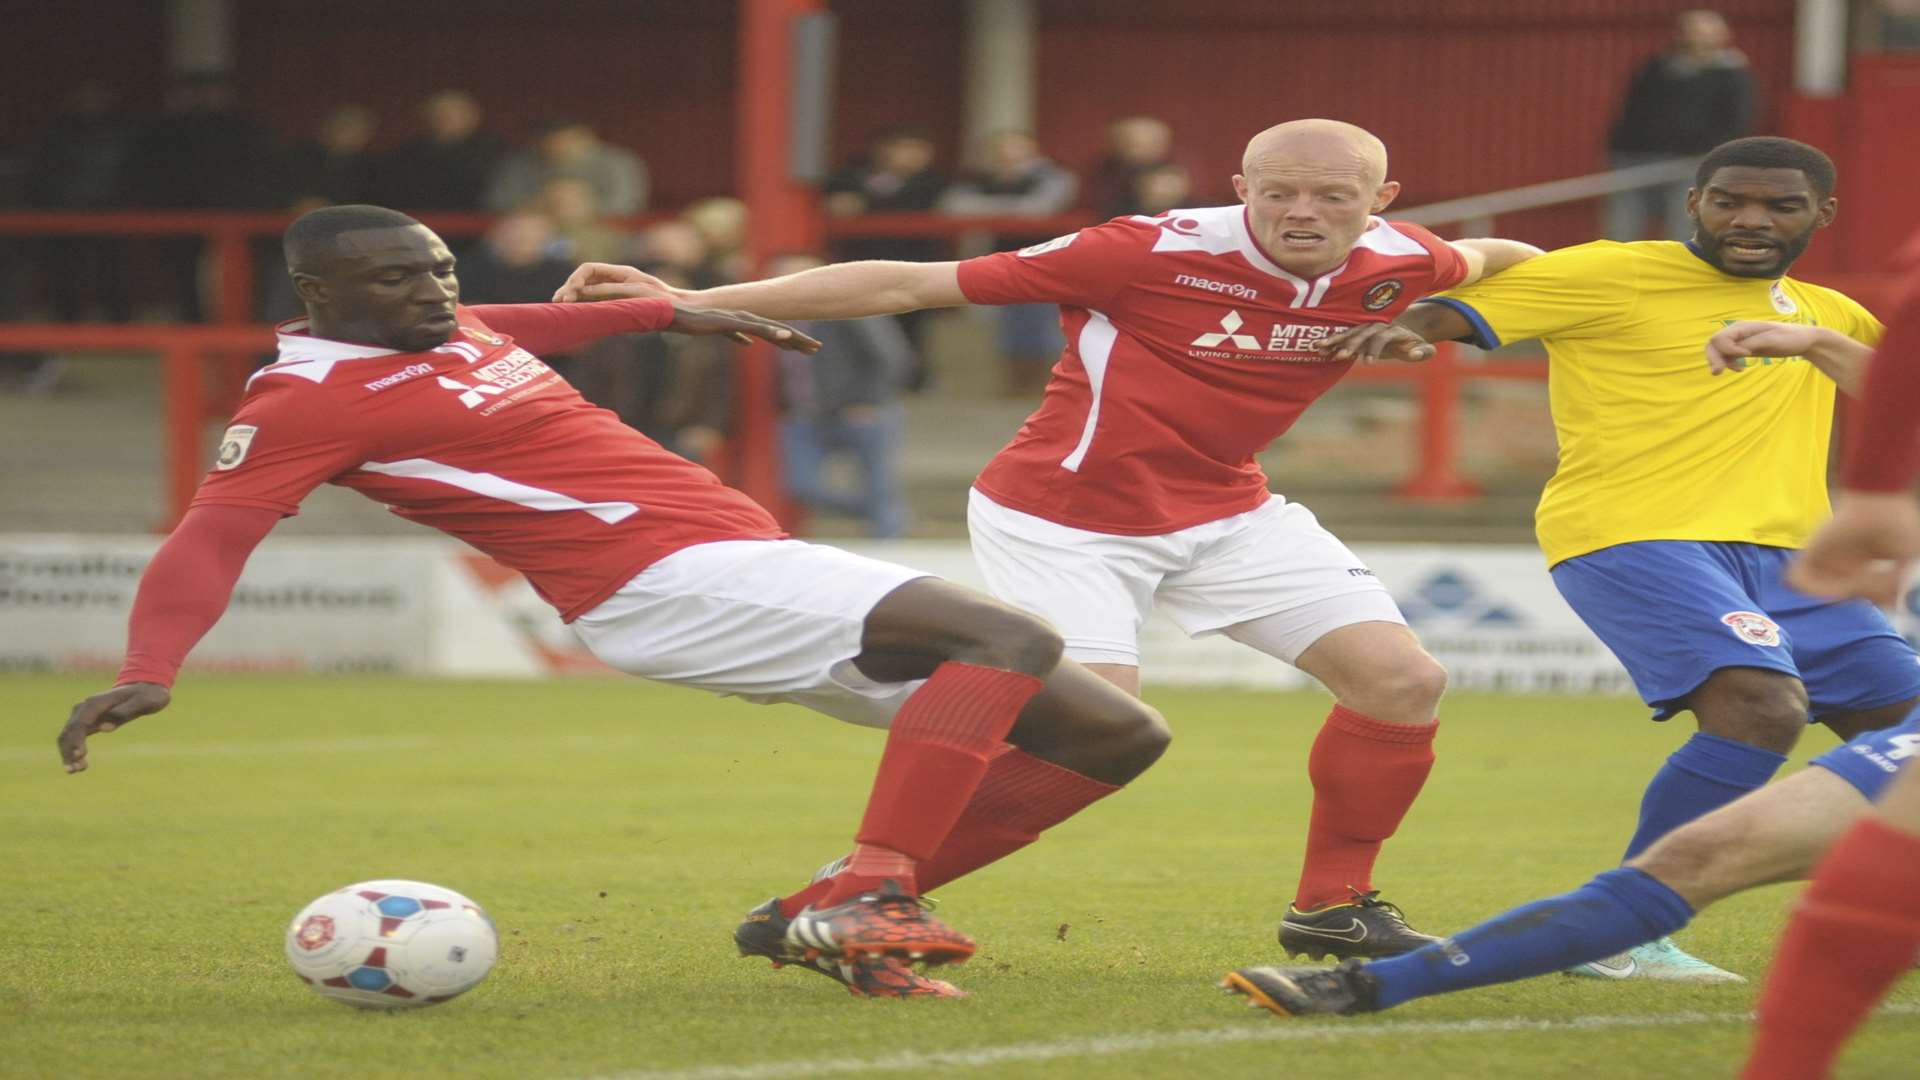 Ebbsfleet could not find the target against Bath. Picture: Steve Crispe.